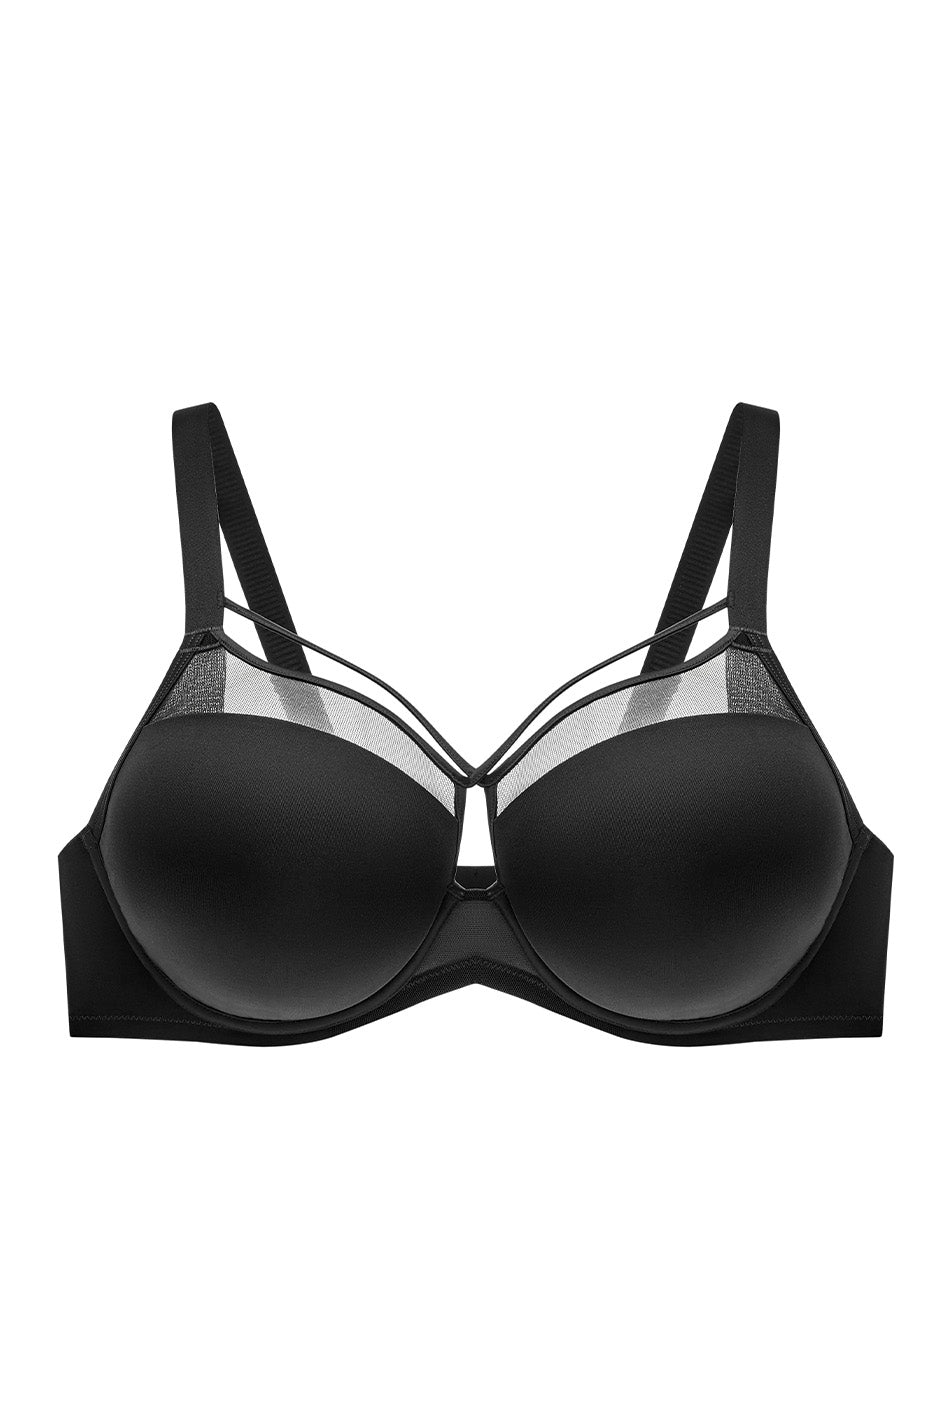 Seamed Cup Bras